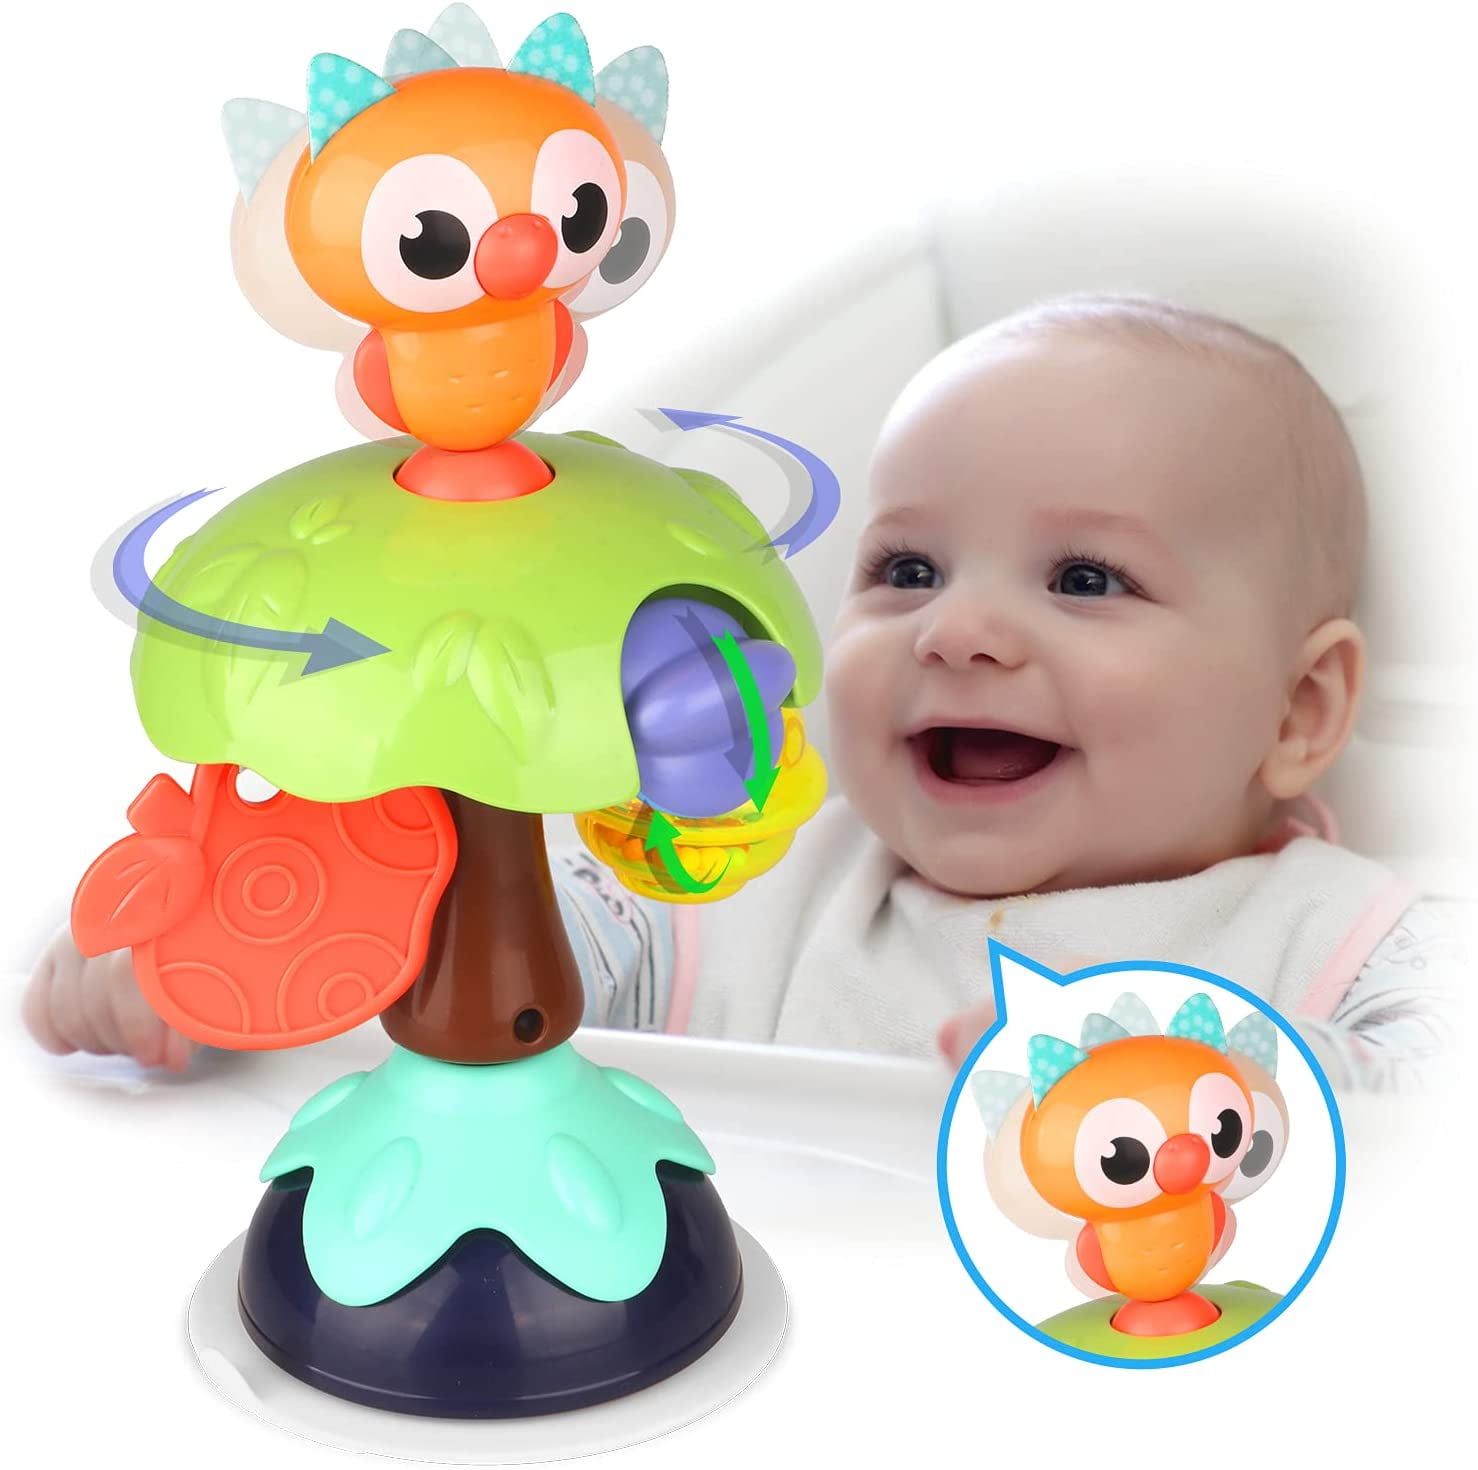 Pink Baby Interactive High Chair Toy Developmental Suction Cup Rattle for Early Learning Months Infant & Toddler for 6 